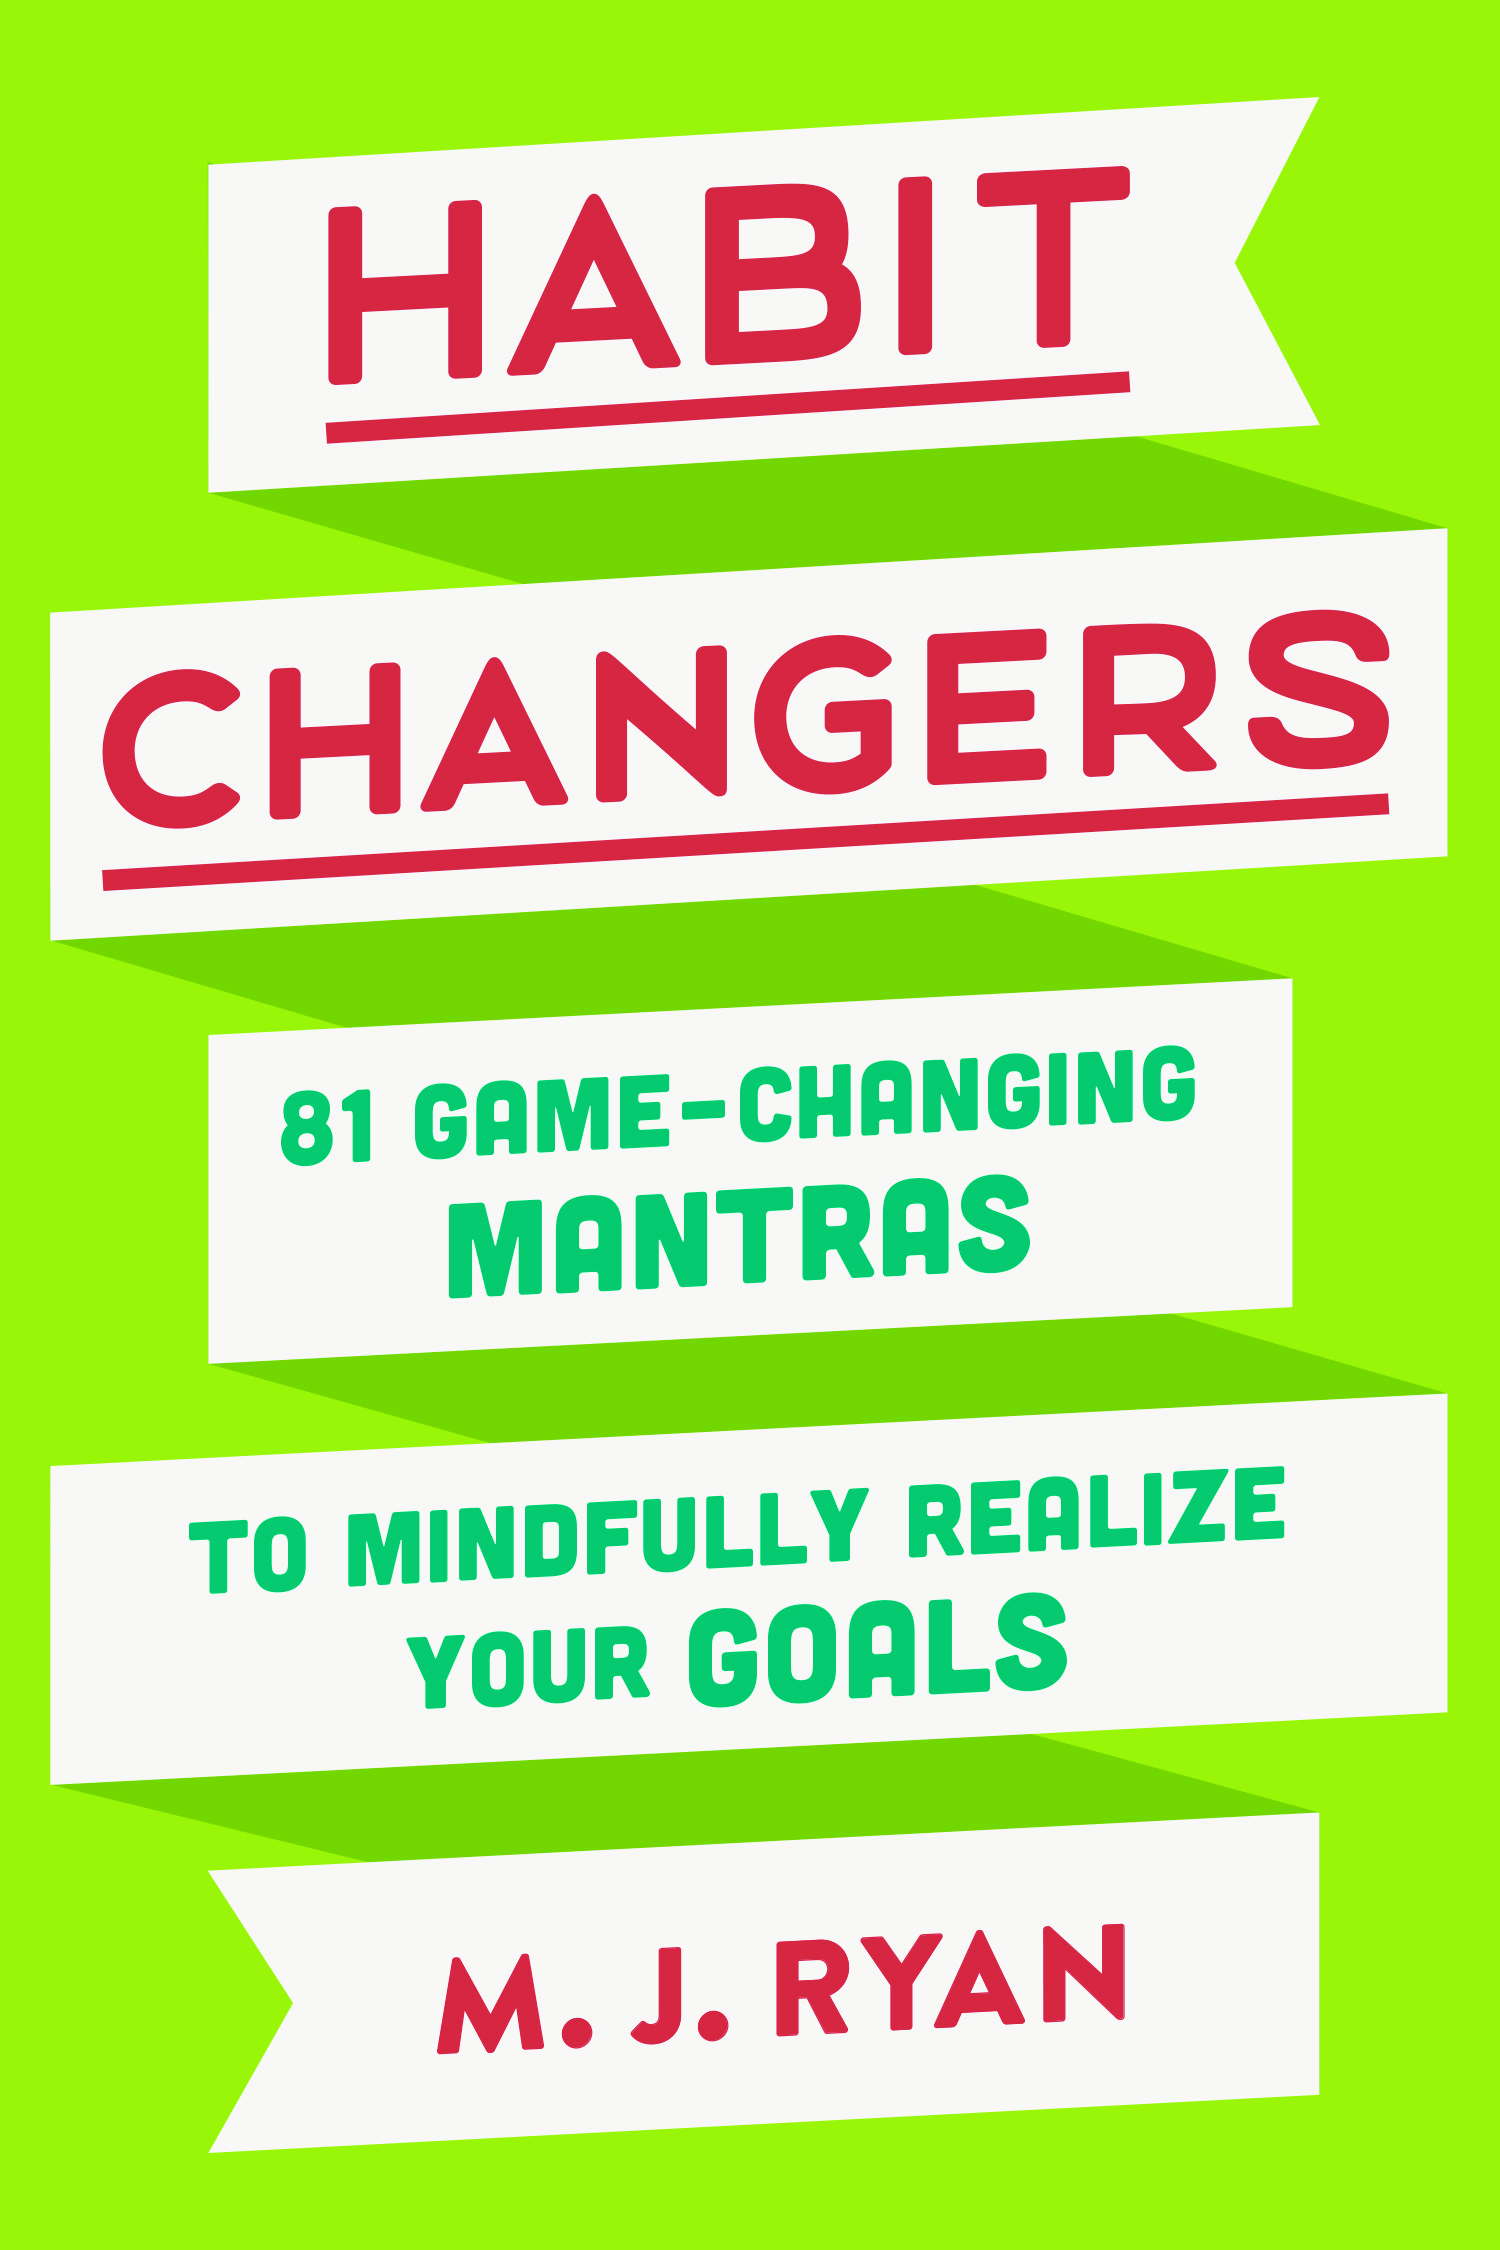 5 Habits That Changed My Life